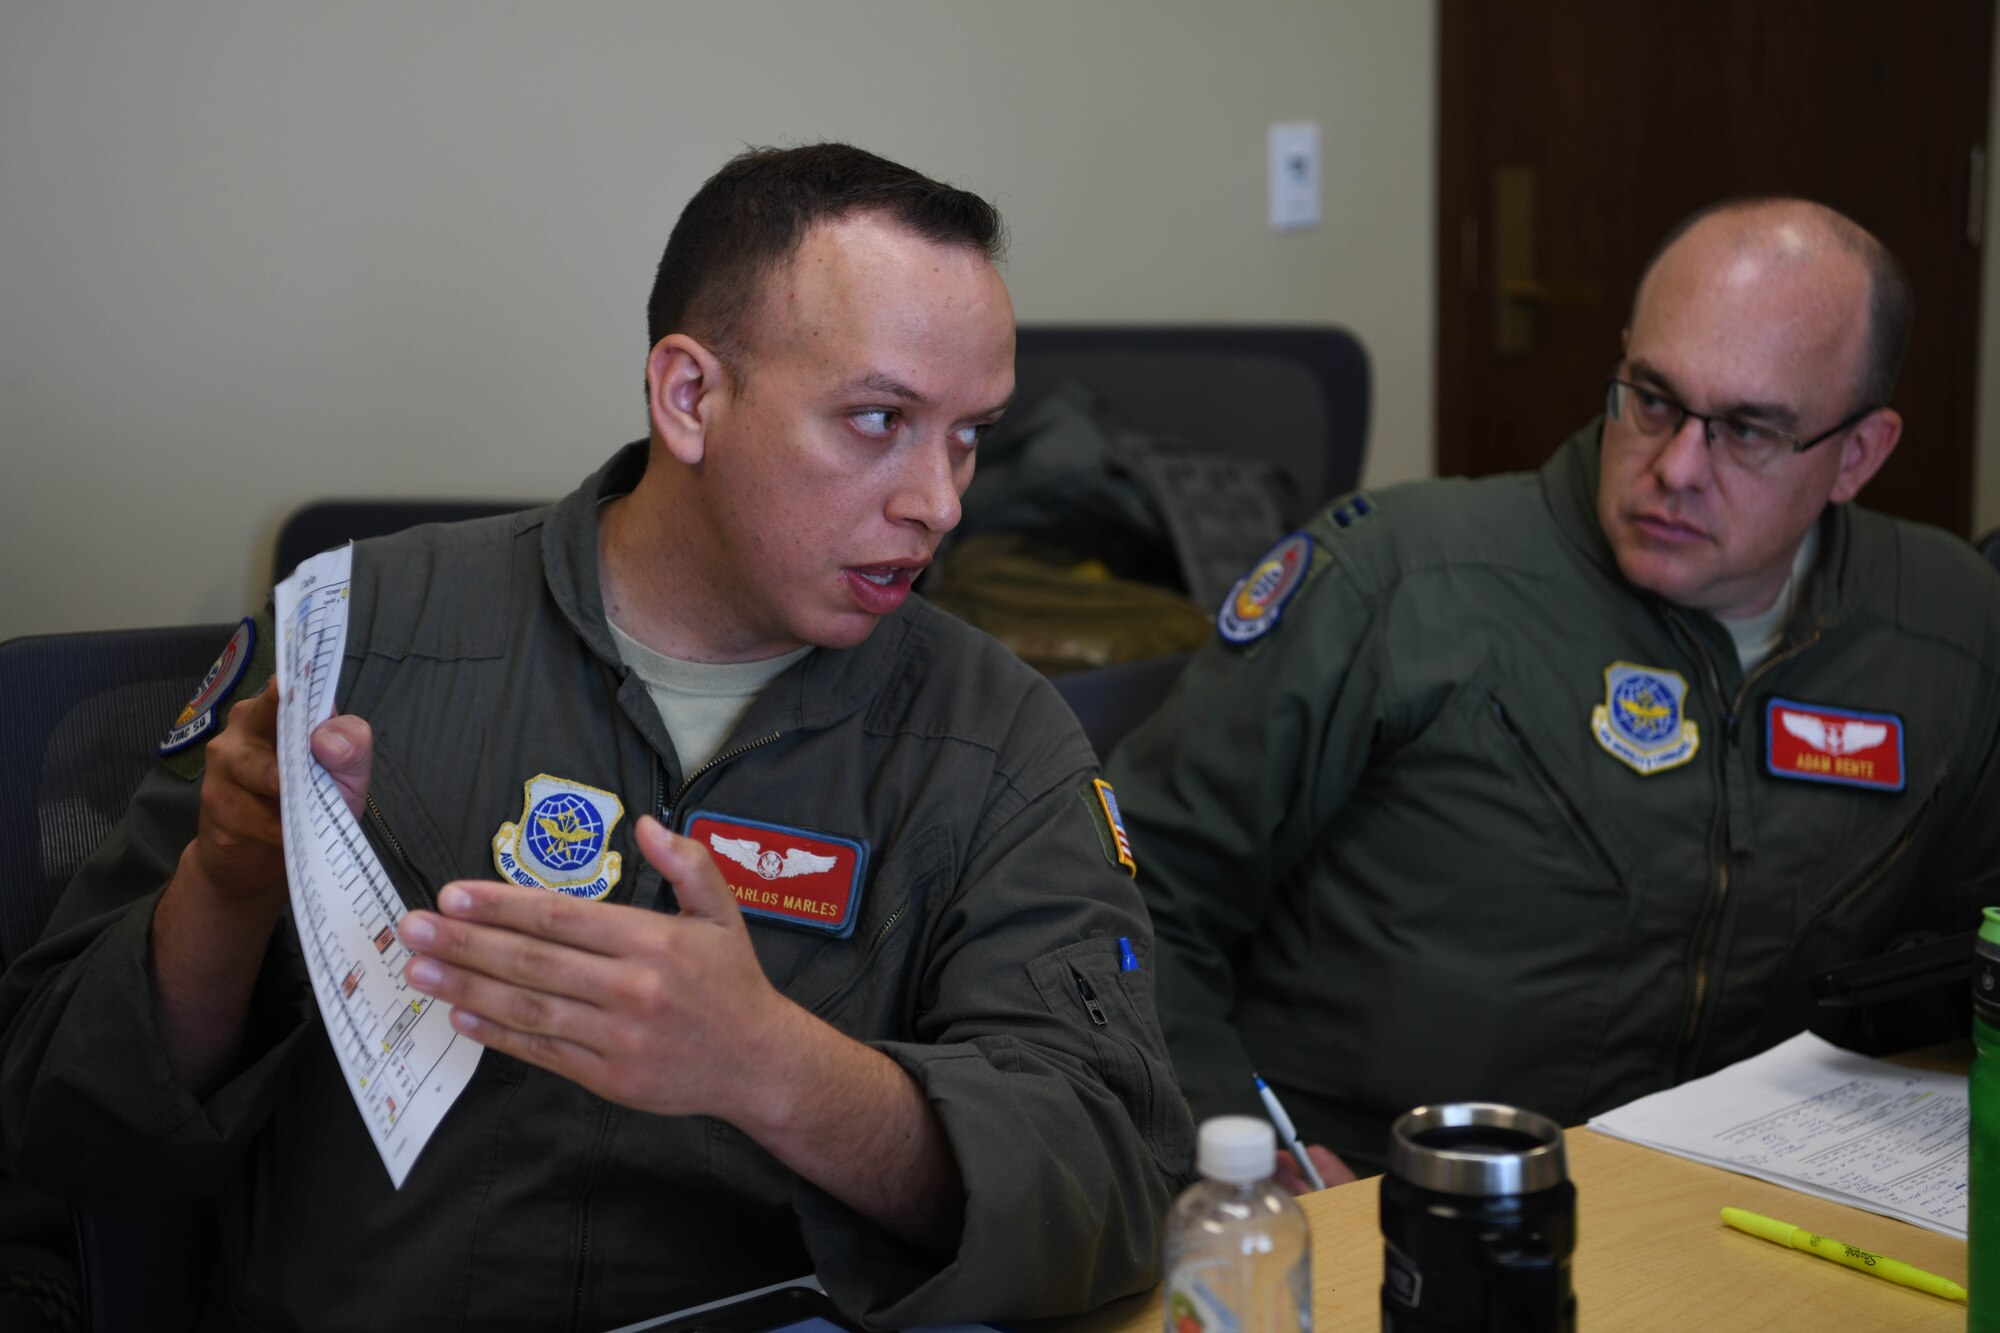 Airman shows information to another person